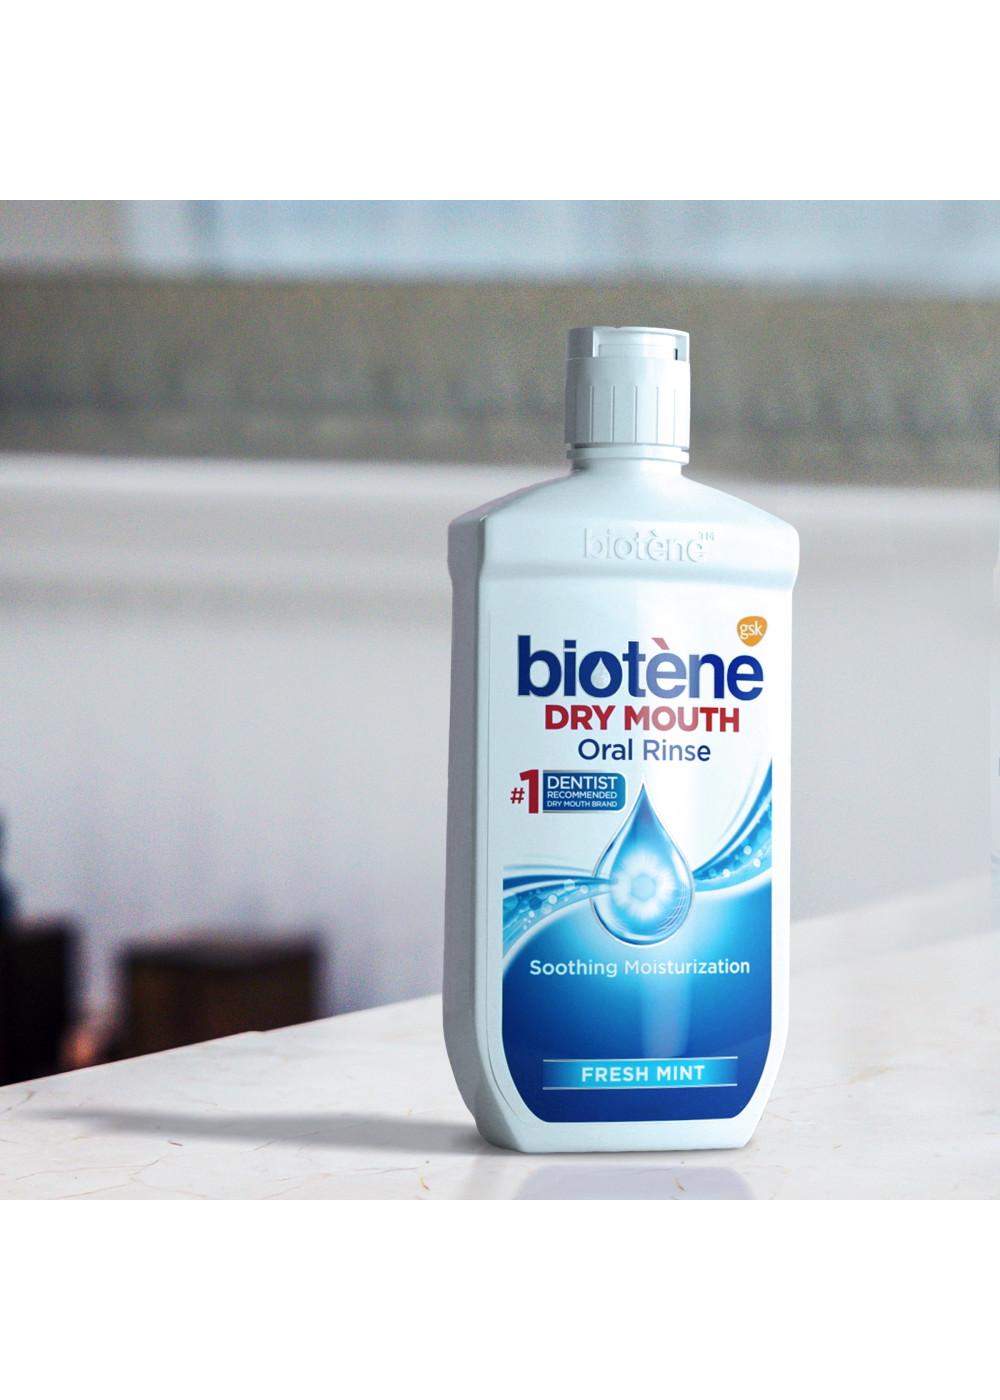 Biotene Dry Mouth Oral Rinse - Fresh Mint; image 5 of 10